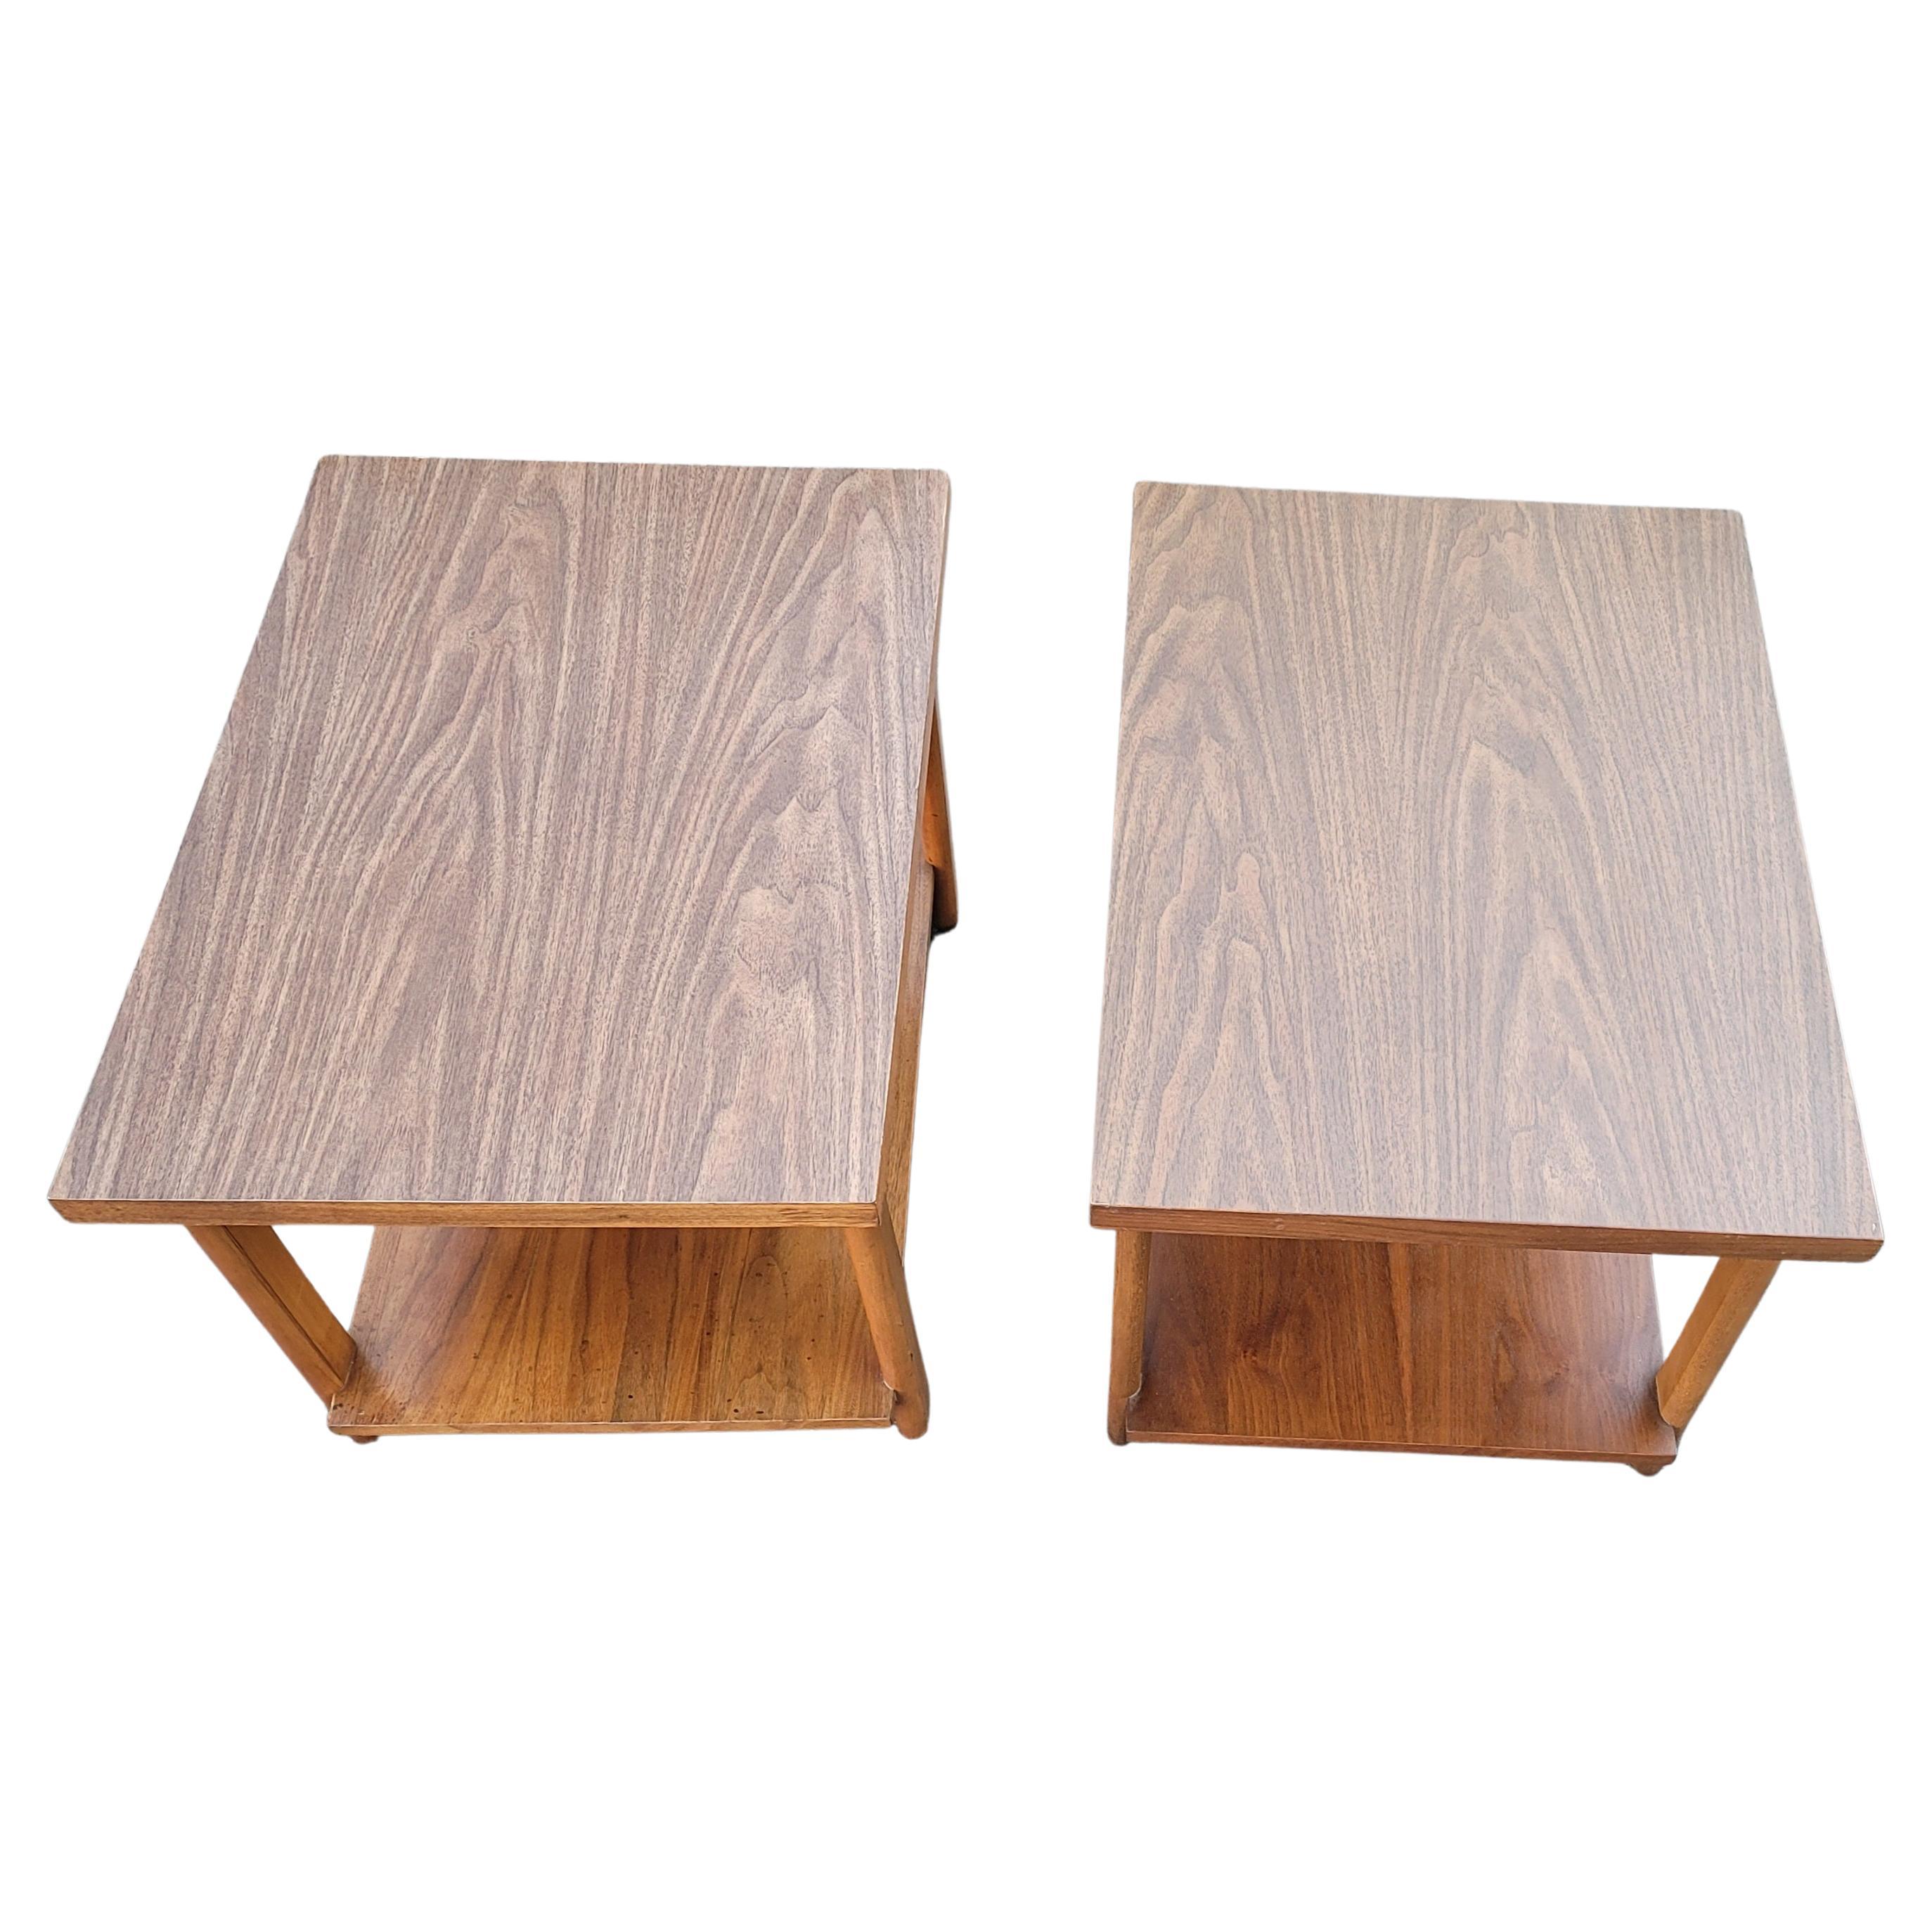 Mid-Century Modern 1960s Lane Altavista Two Tier Side Tables with Formica Top For Sale